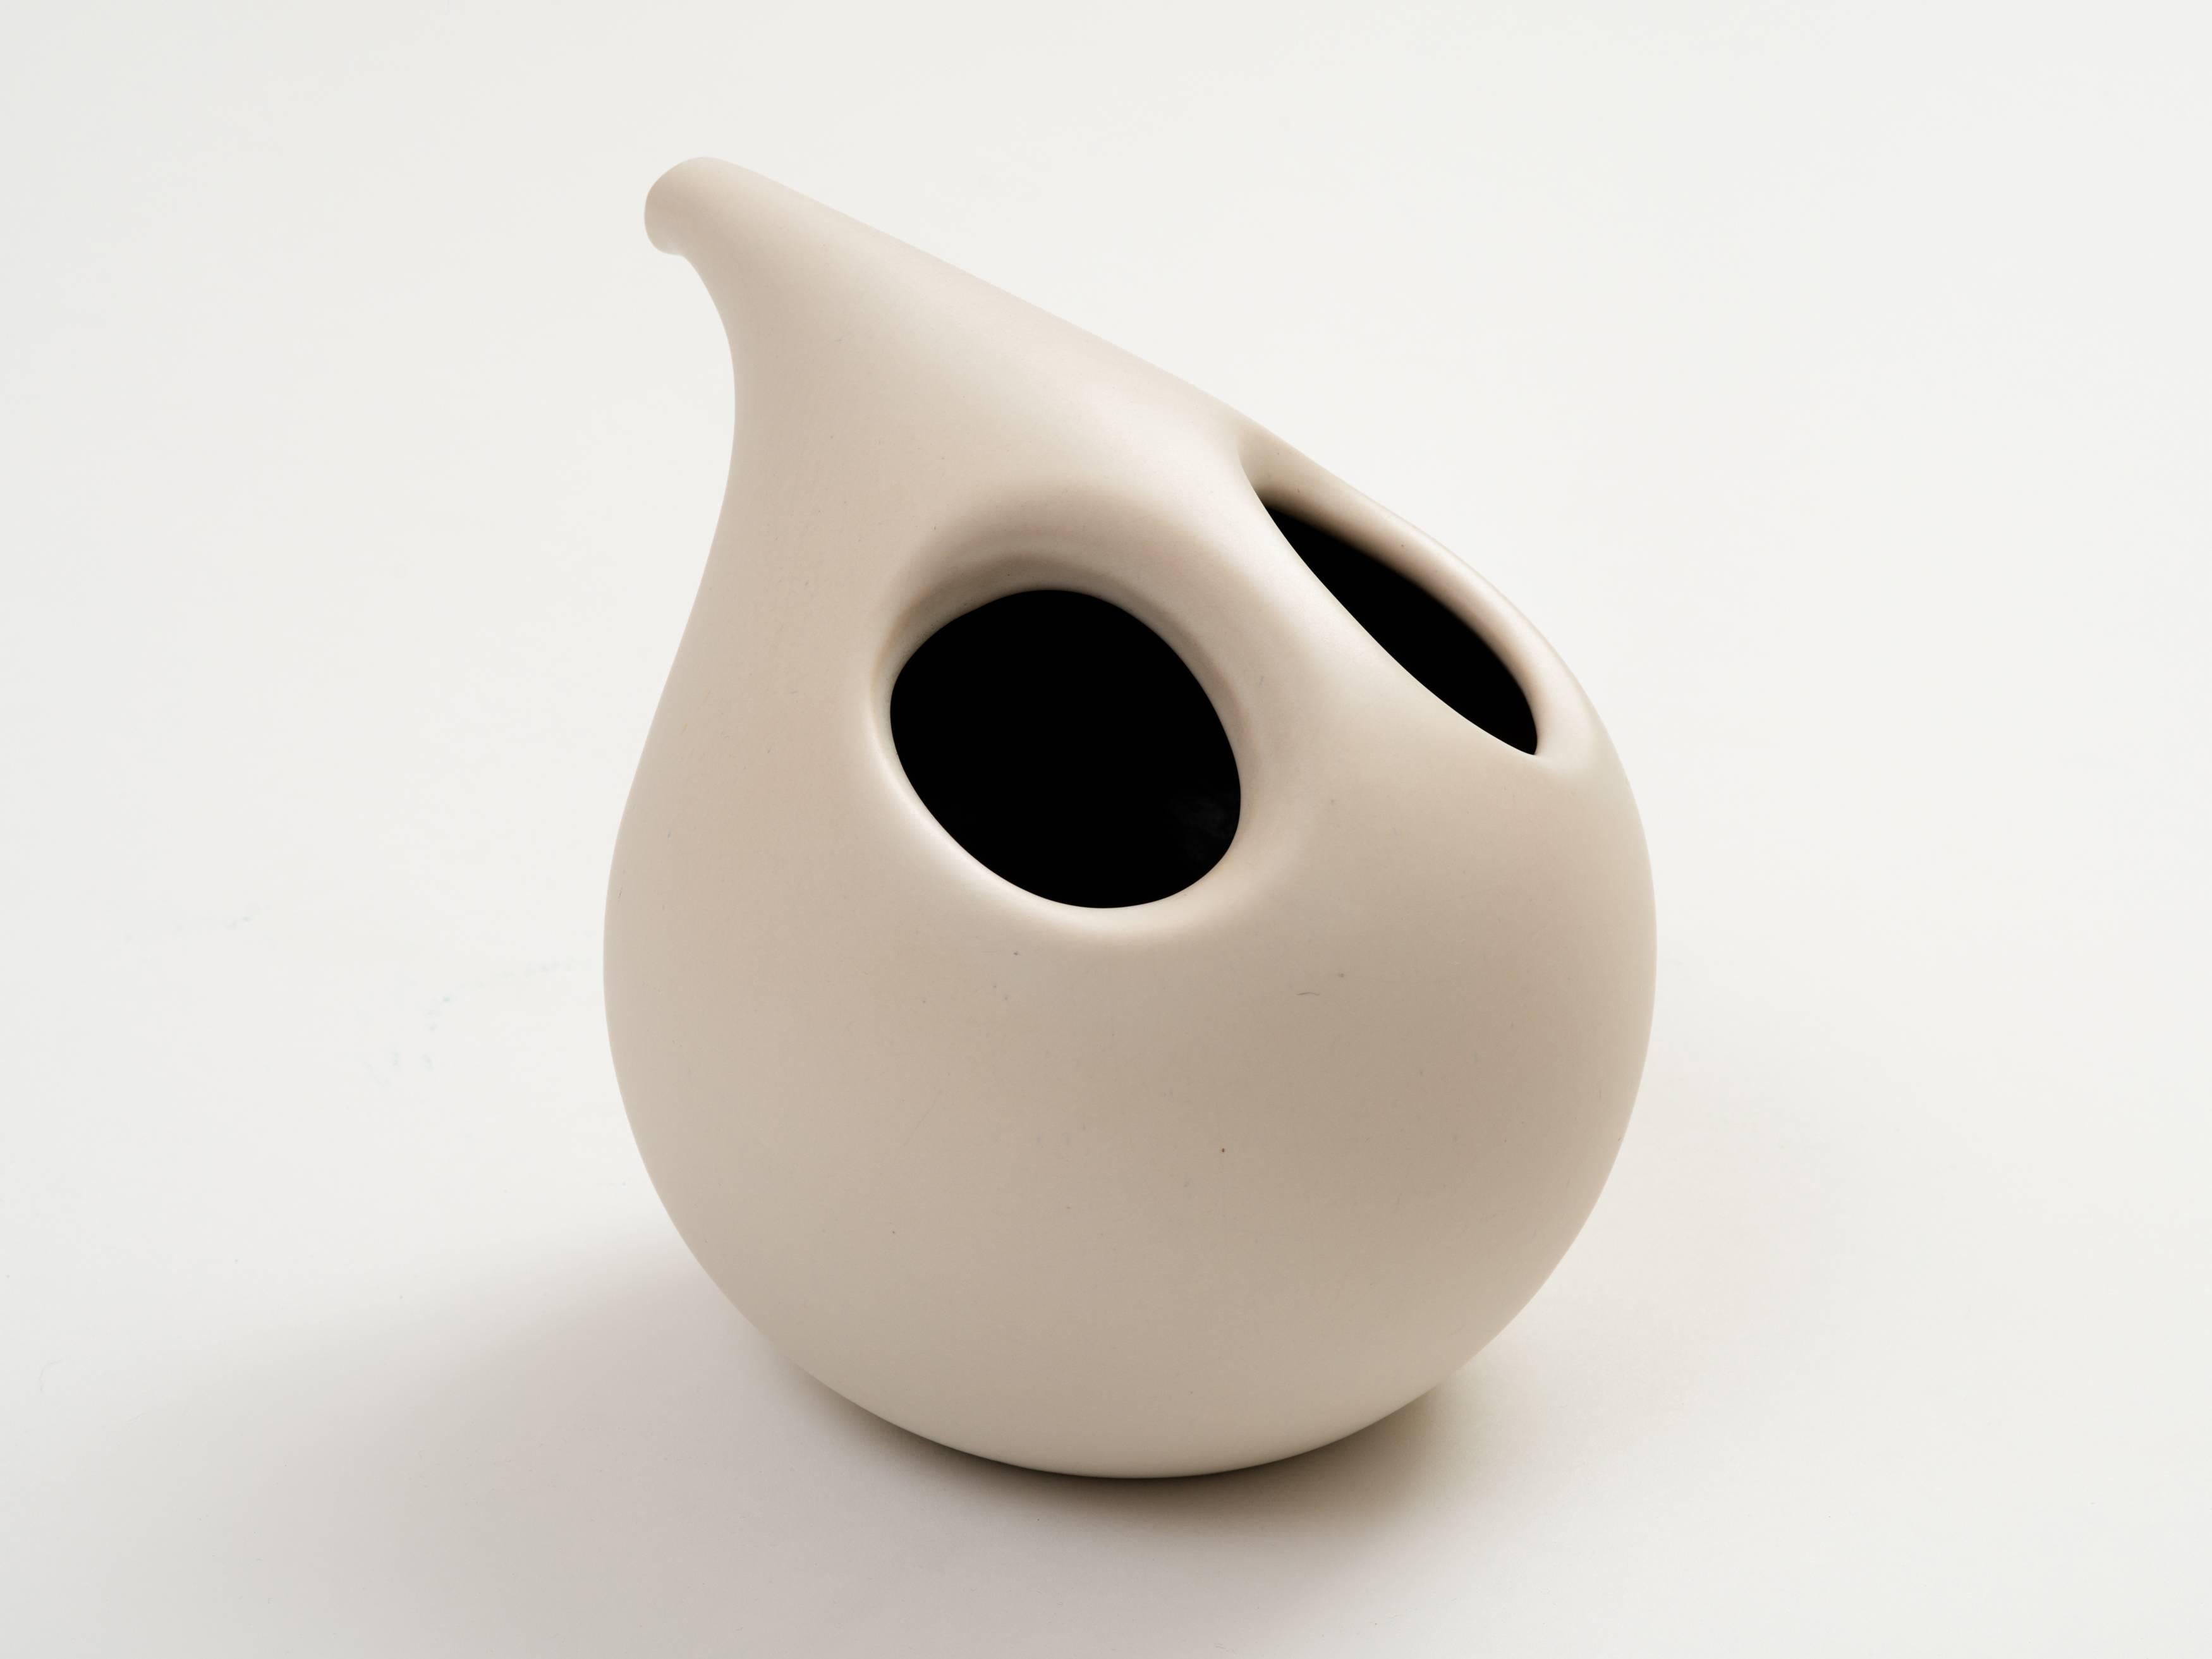 An intriguing slipcast ceramic vase resembling a pitcher or decanter with a faux spout and two openings at top that create a handle. Such a pleasing and well-proportioned modernist design, finished in a matte white glaze (interior glaze is black). A